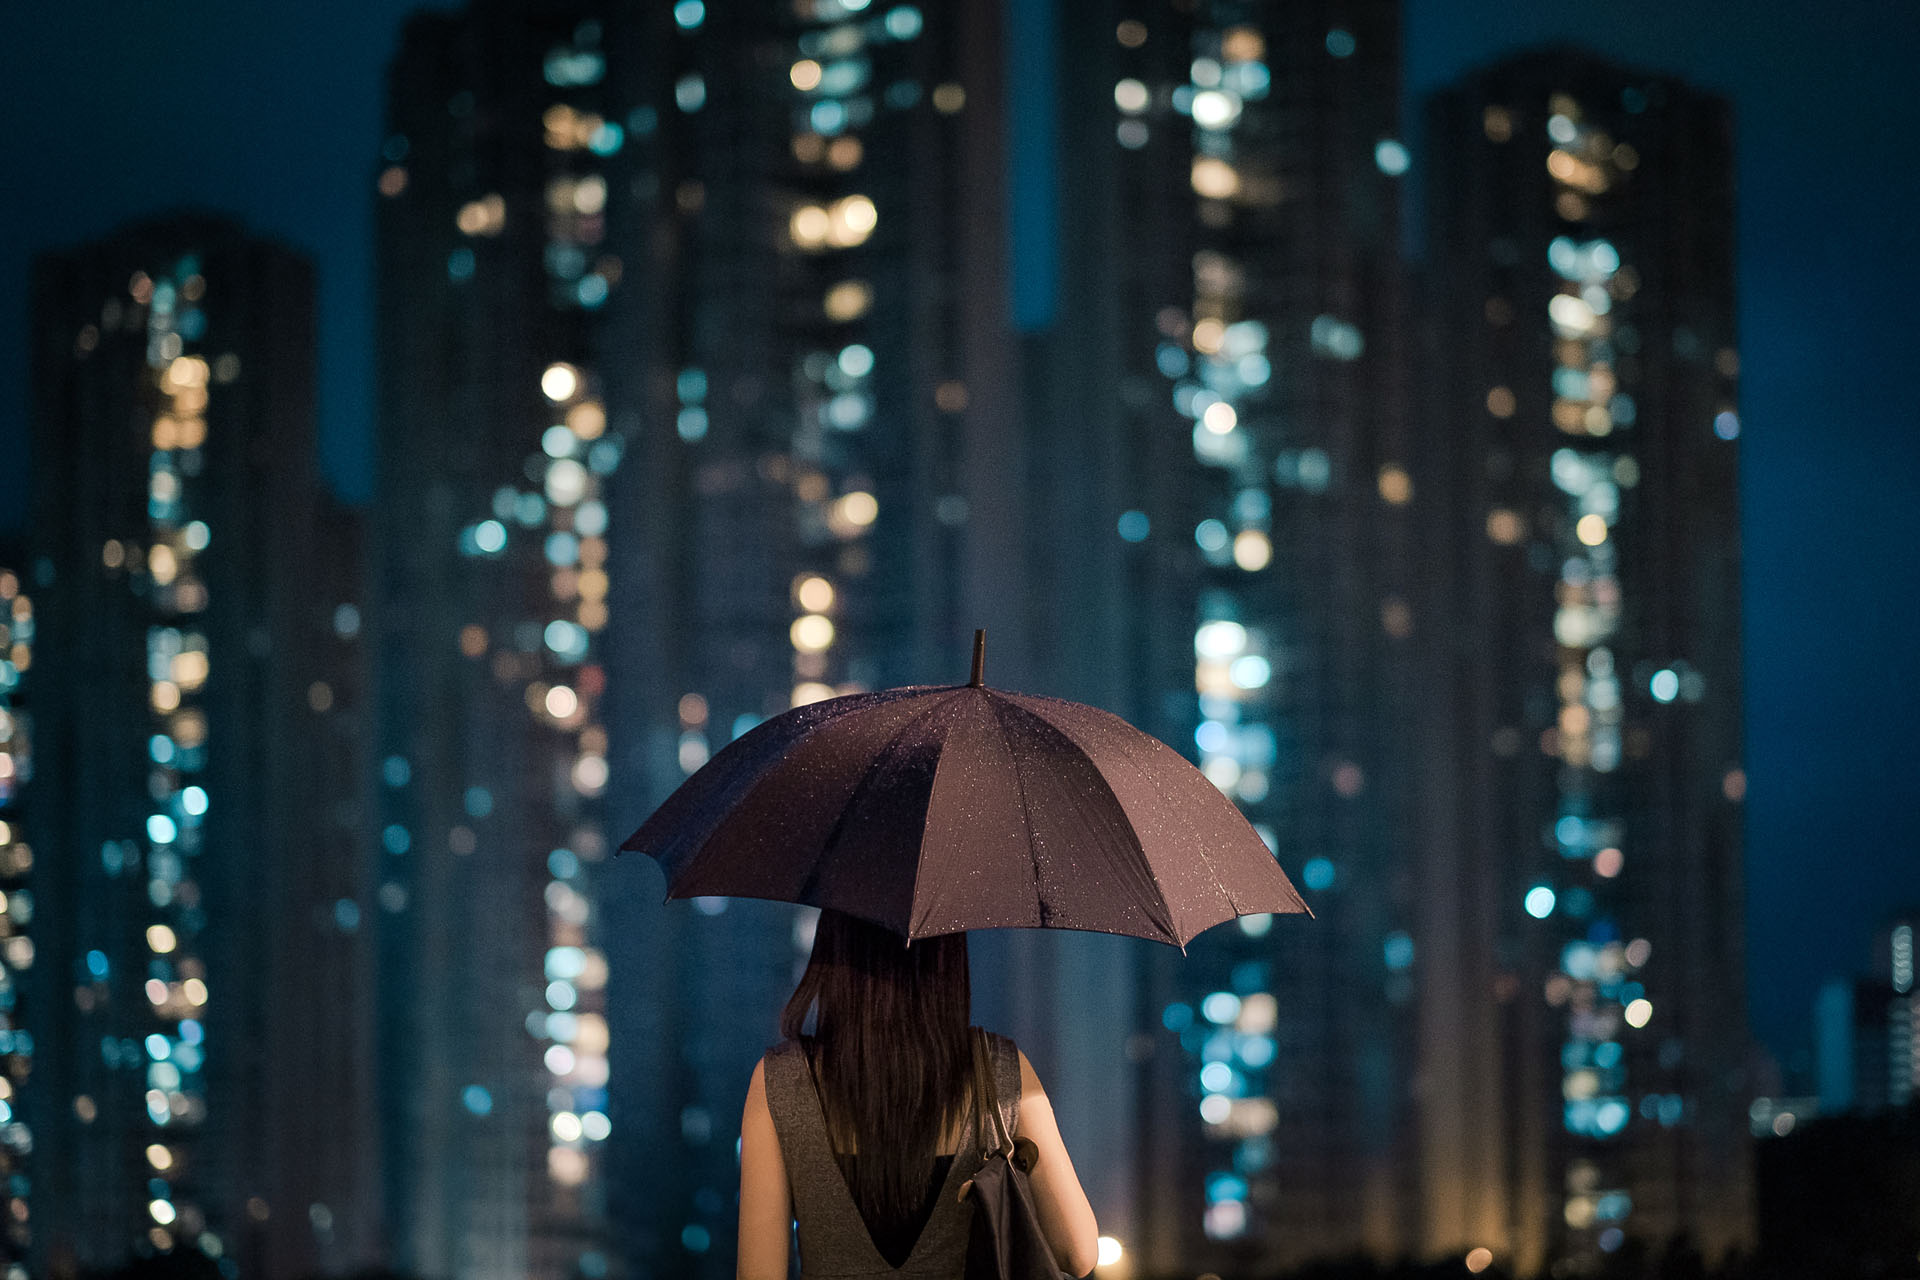 View of a woman from behind looking at a city skyline at night